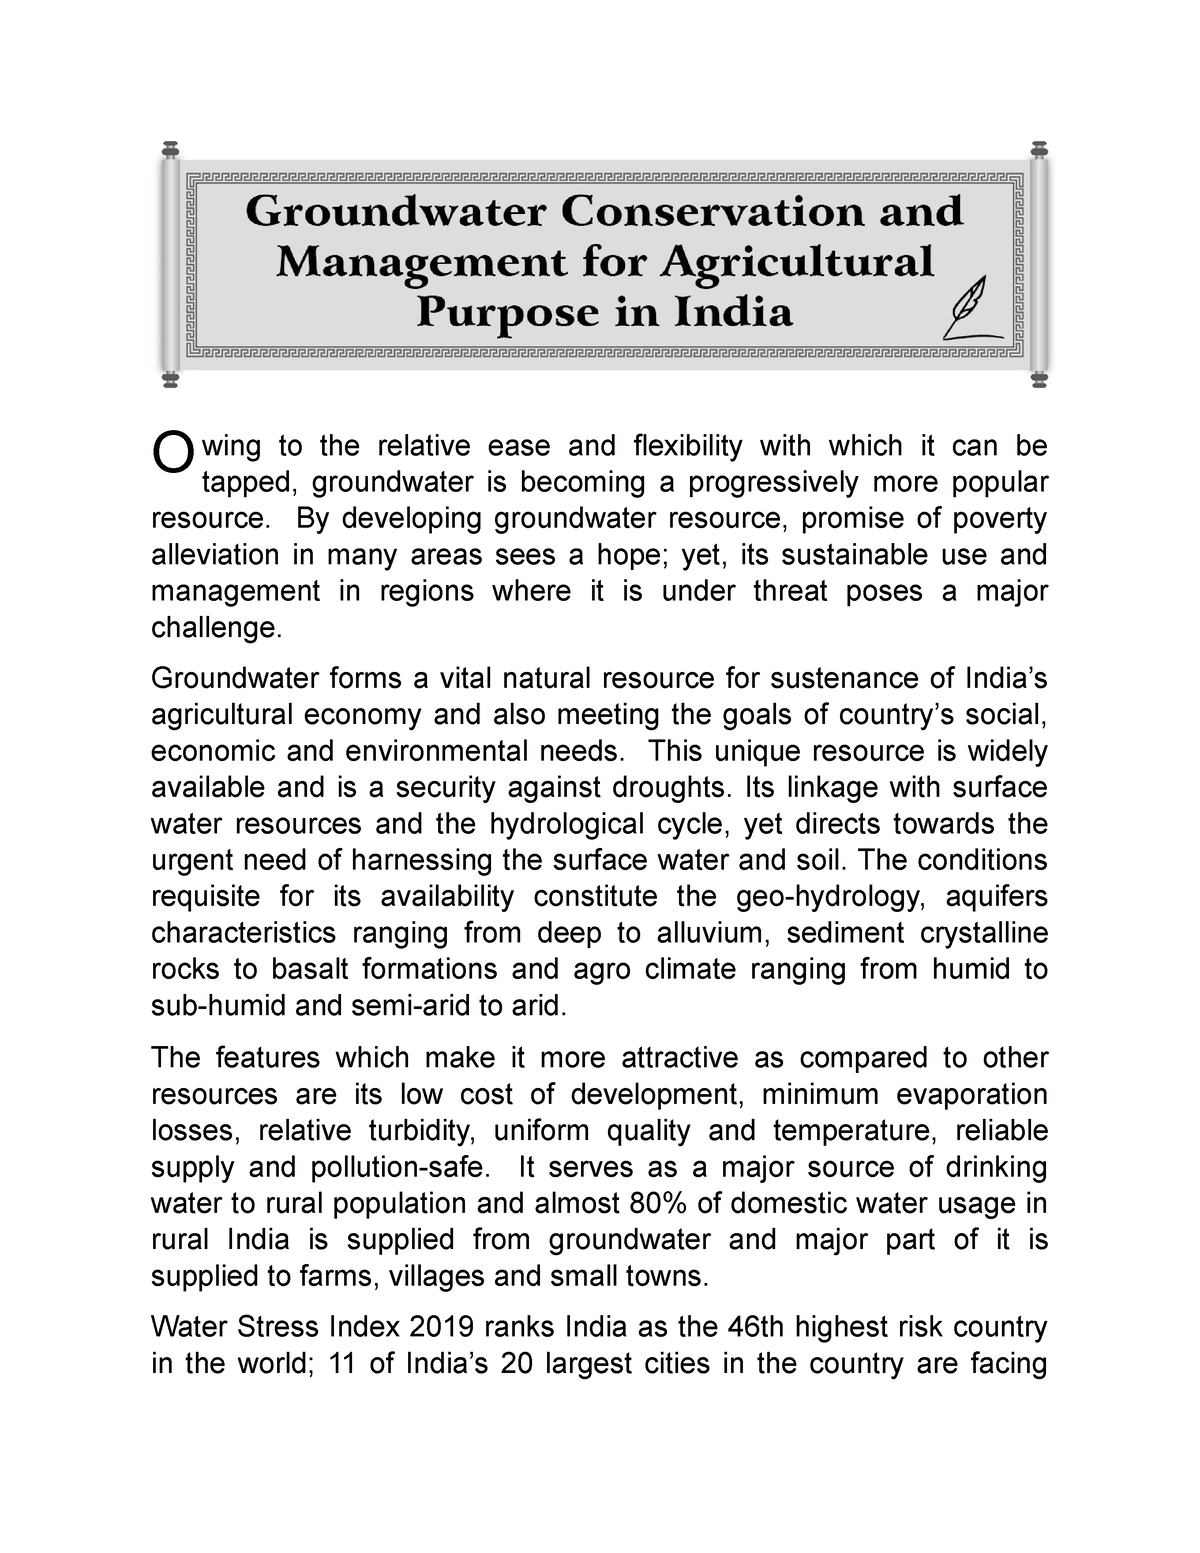 essay on groundwater conservation